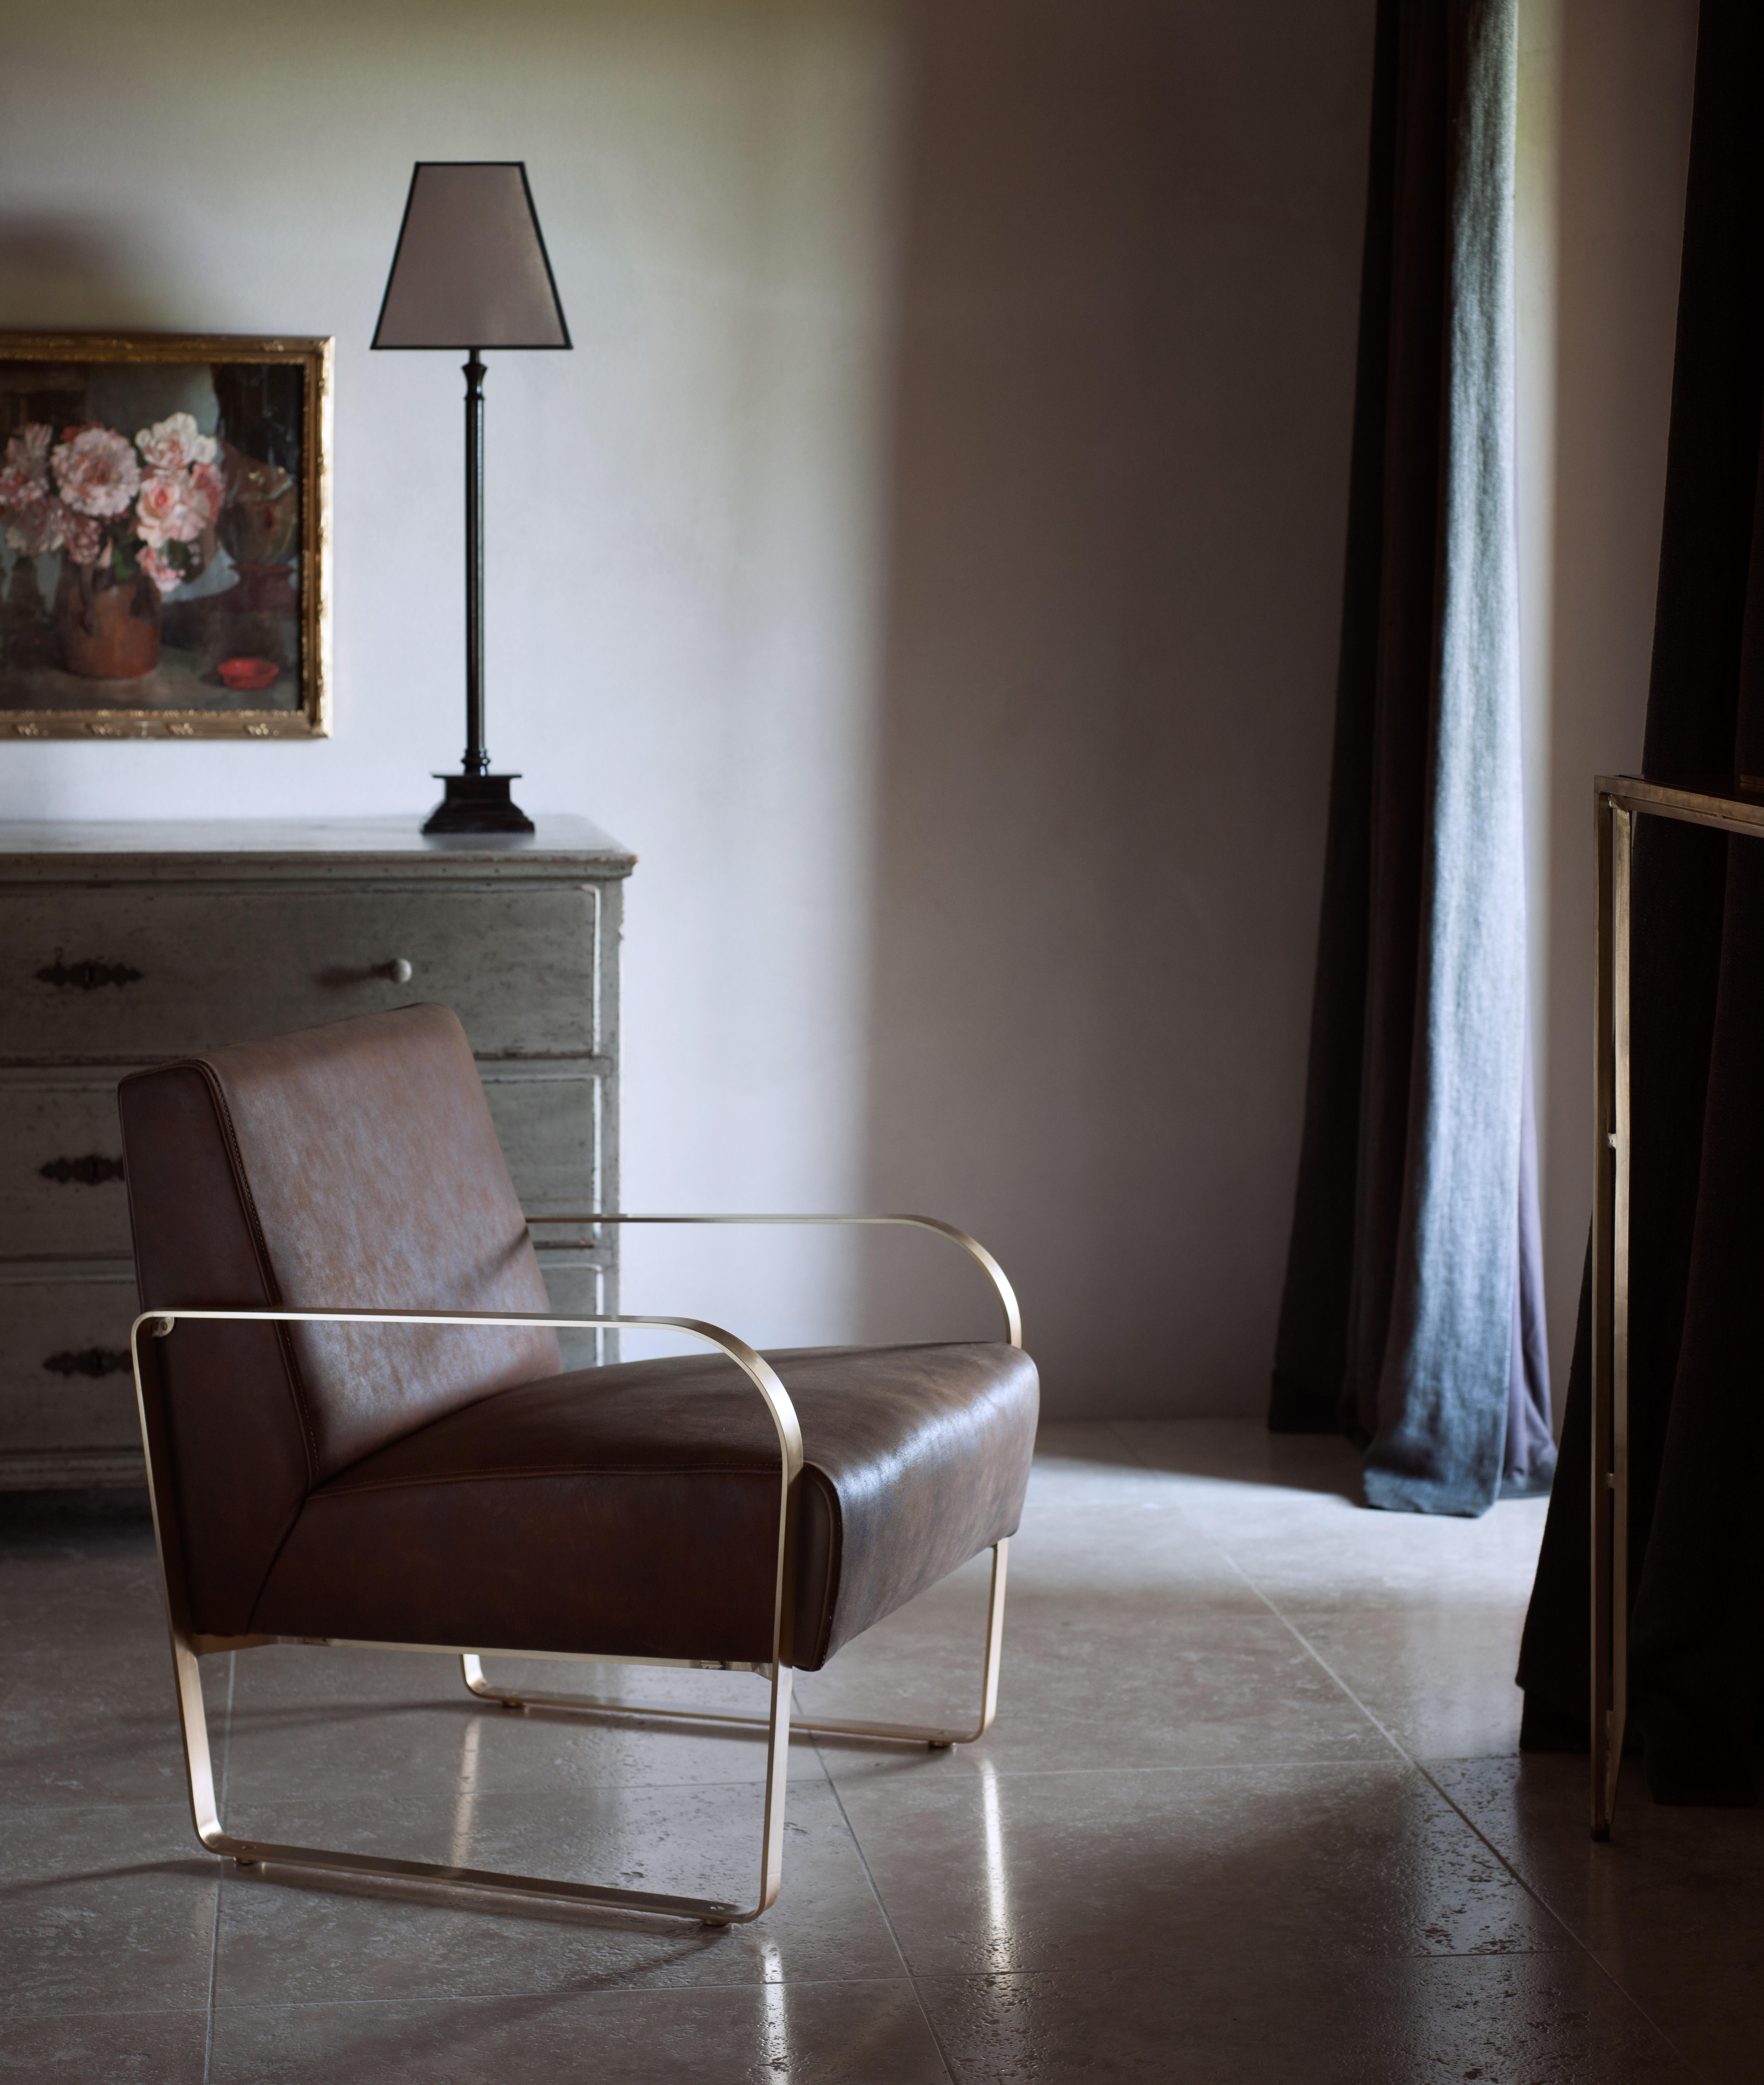 The leather armchair - A brass structure holding a superbly crafted handstitched leather seat.
B.B. - I love the Italian leather contrasting with the Classic 1930s brushed brass frame.